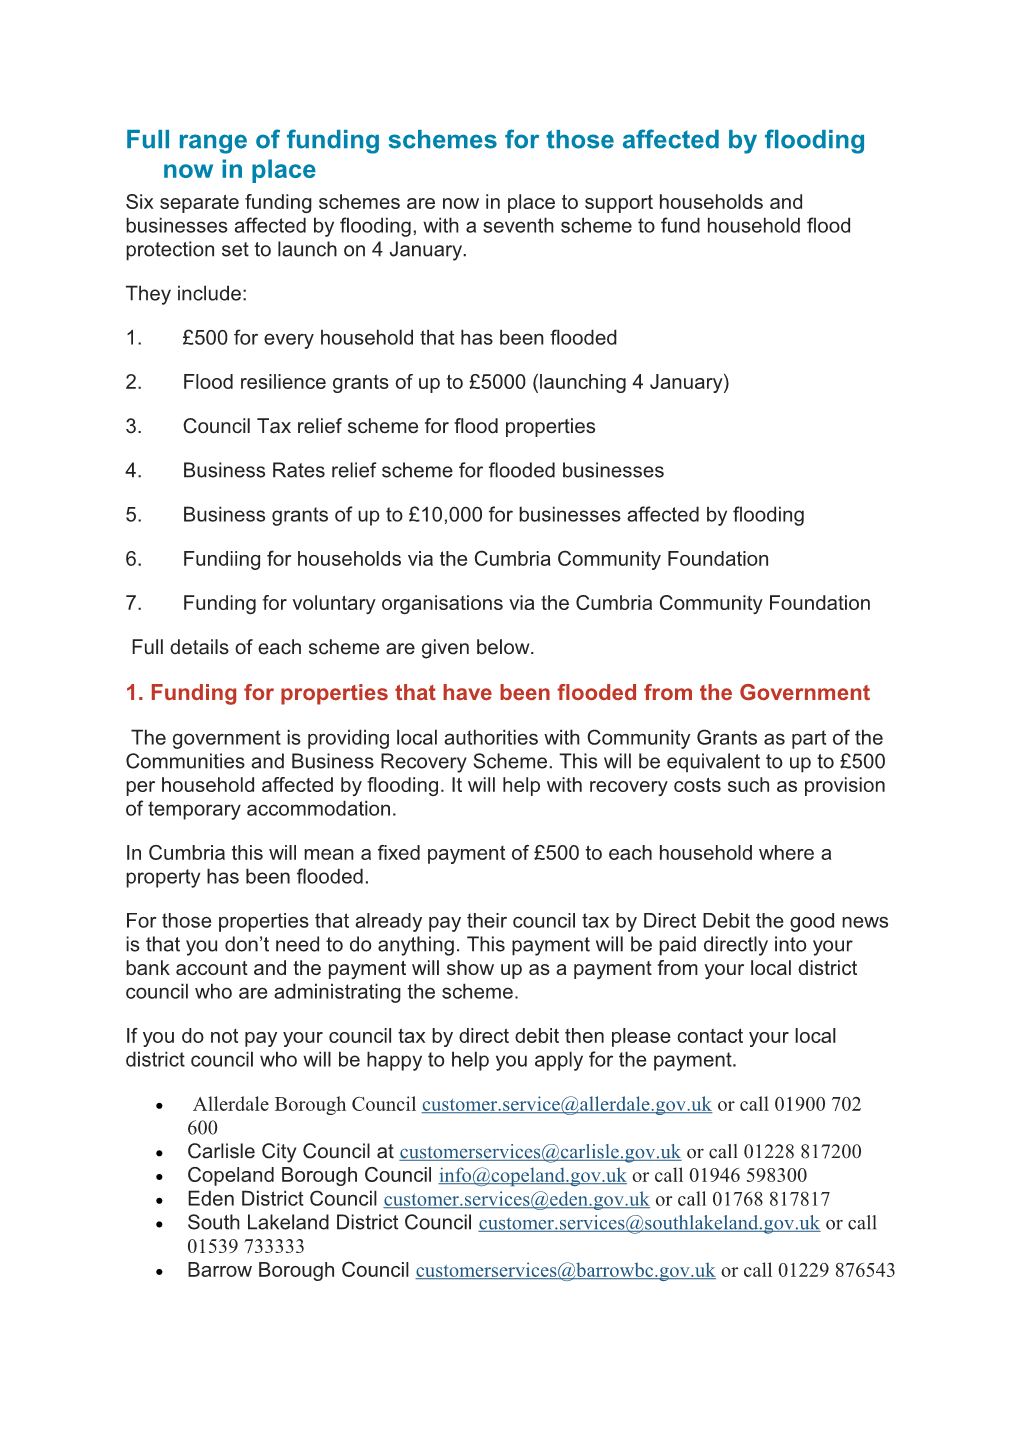 Full Range of Funding Schemes for Those Affected by Flooding Now in Place